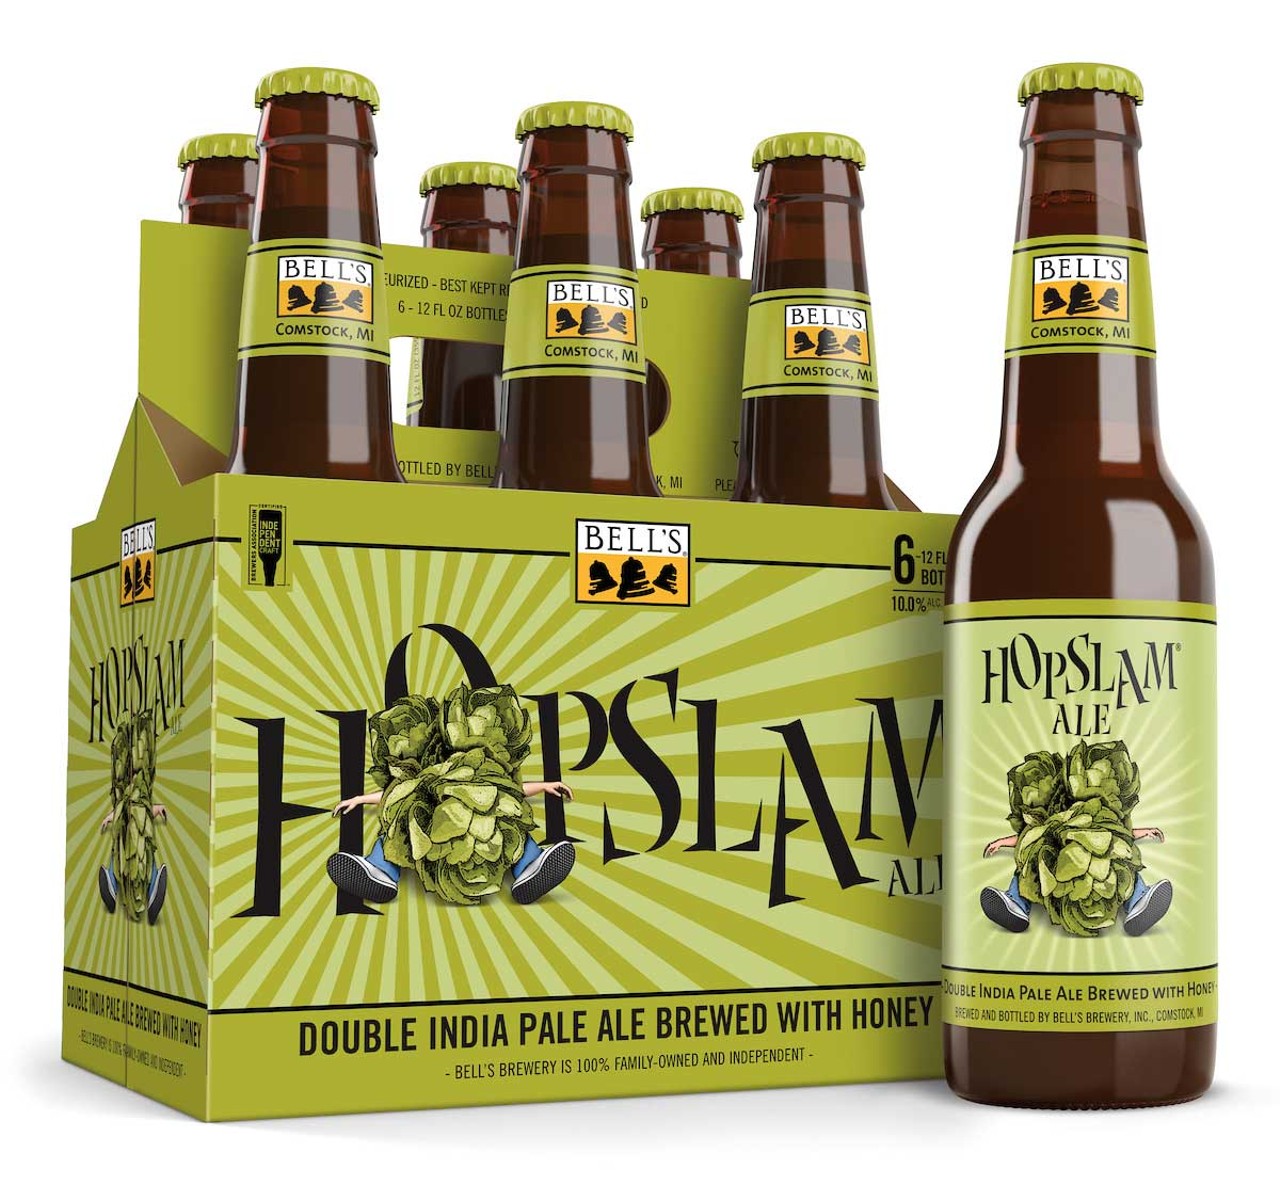 Bell's Hopslam
bellsbeer.com
Last year, Michigan brewery Bell’s moved the date of its 
popular (and very dank) seasonal Hopslam Double IPA from 
winter to late fall. Why? “In short, we have been listening to 
our fans and dry January is a hard time of the year to drink 
Hopslam,” the brewery said. “This change will allow our fan 
base to enjoy the beer with a little less guilt and a little more
celebration.” Hallelujah. You can pick up a six-pack for 
around $17. —Lee DeVito